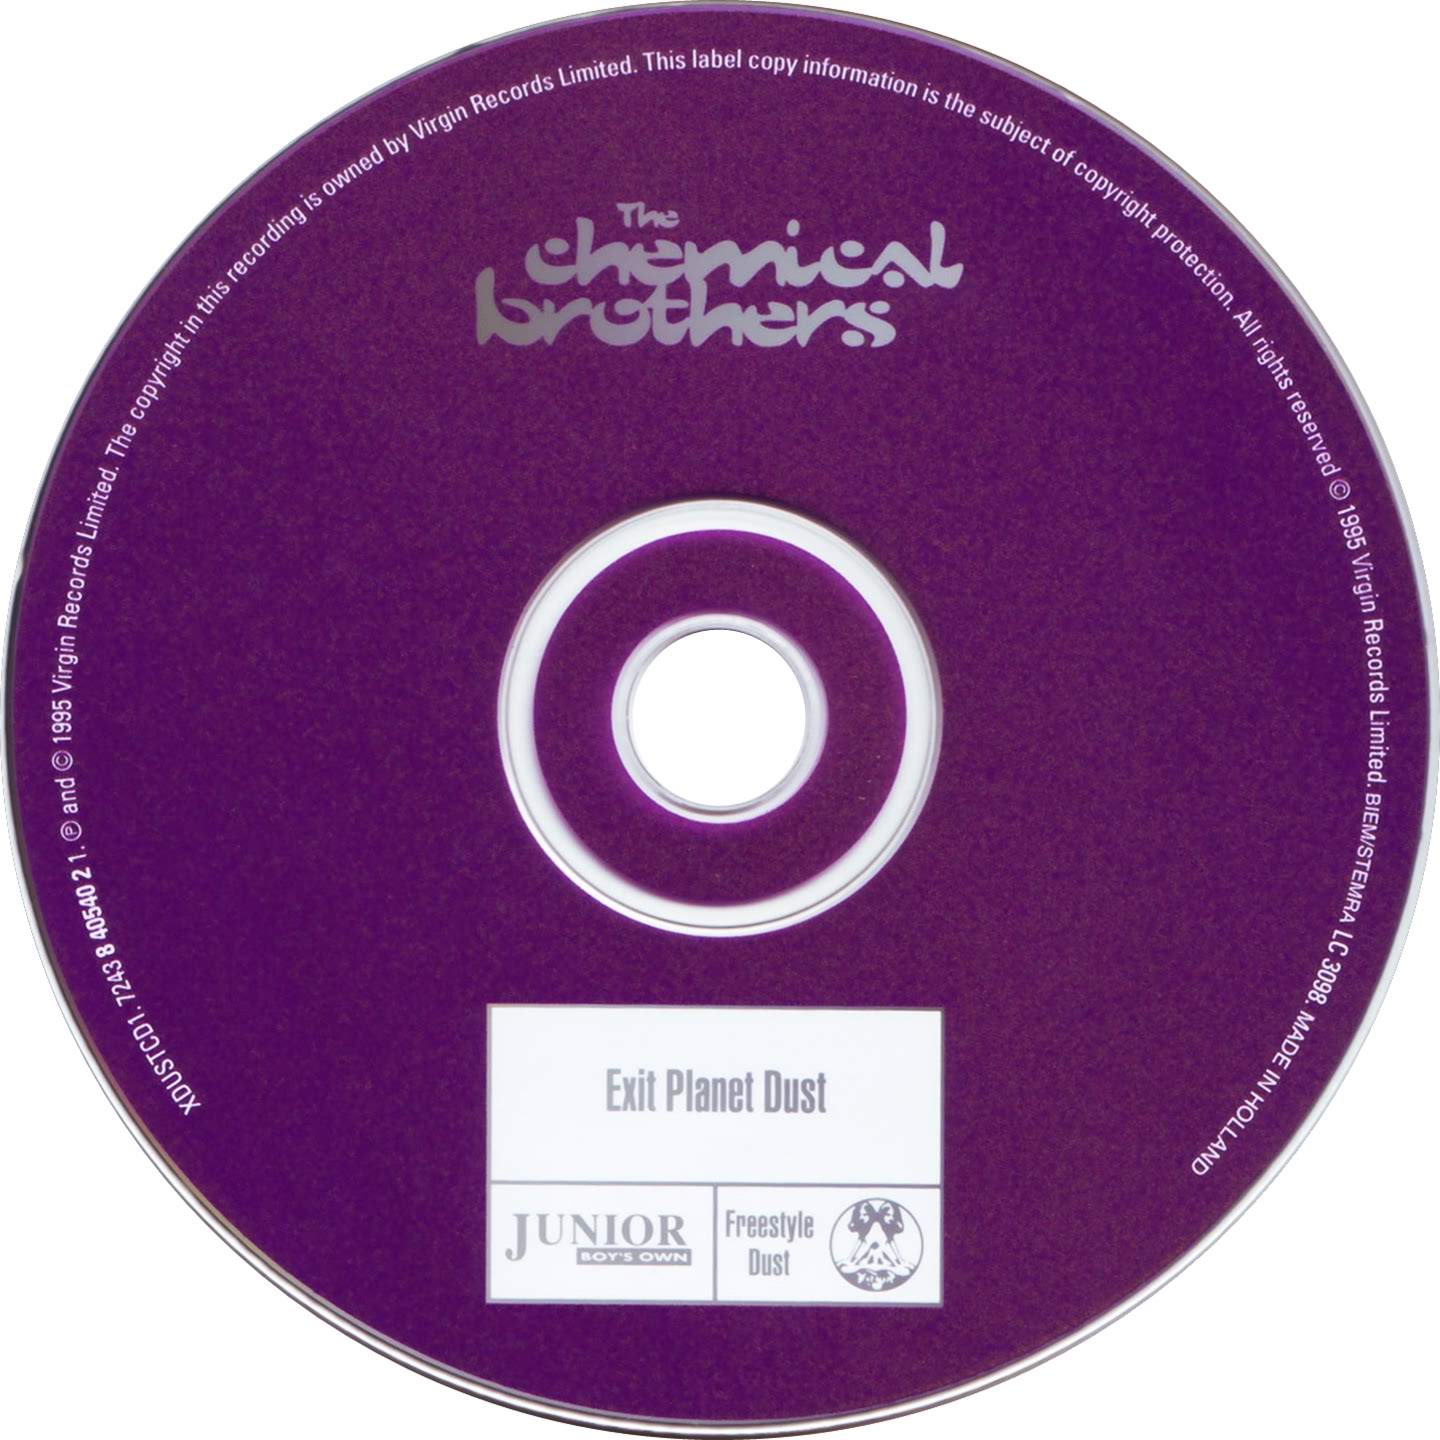 Chemical brothers слушать. The Chemical brothers exit Planet Dust 1995. Exit Planet Dust CD. Marlo Dust диск. The Chemical brothers альбом Greatest Hits 2008.